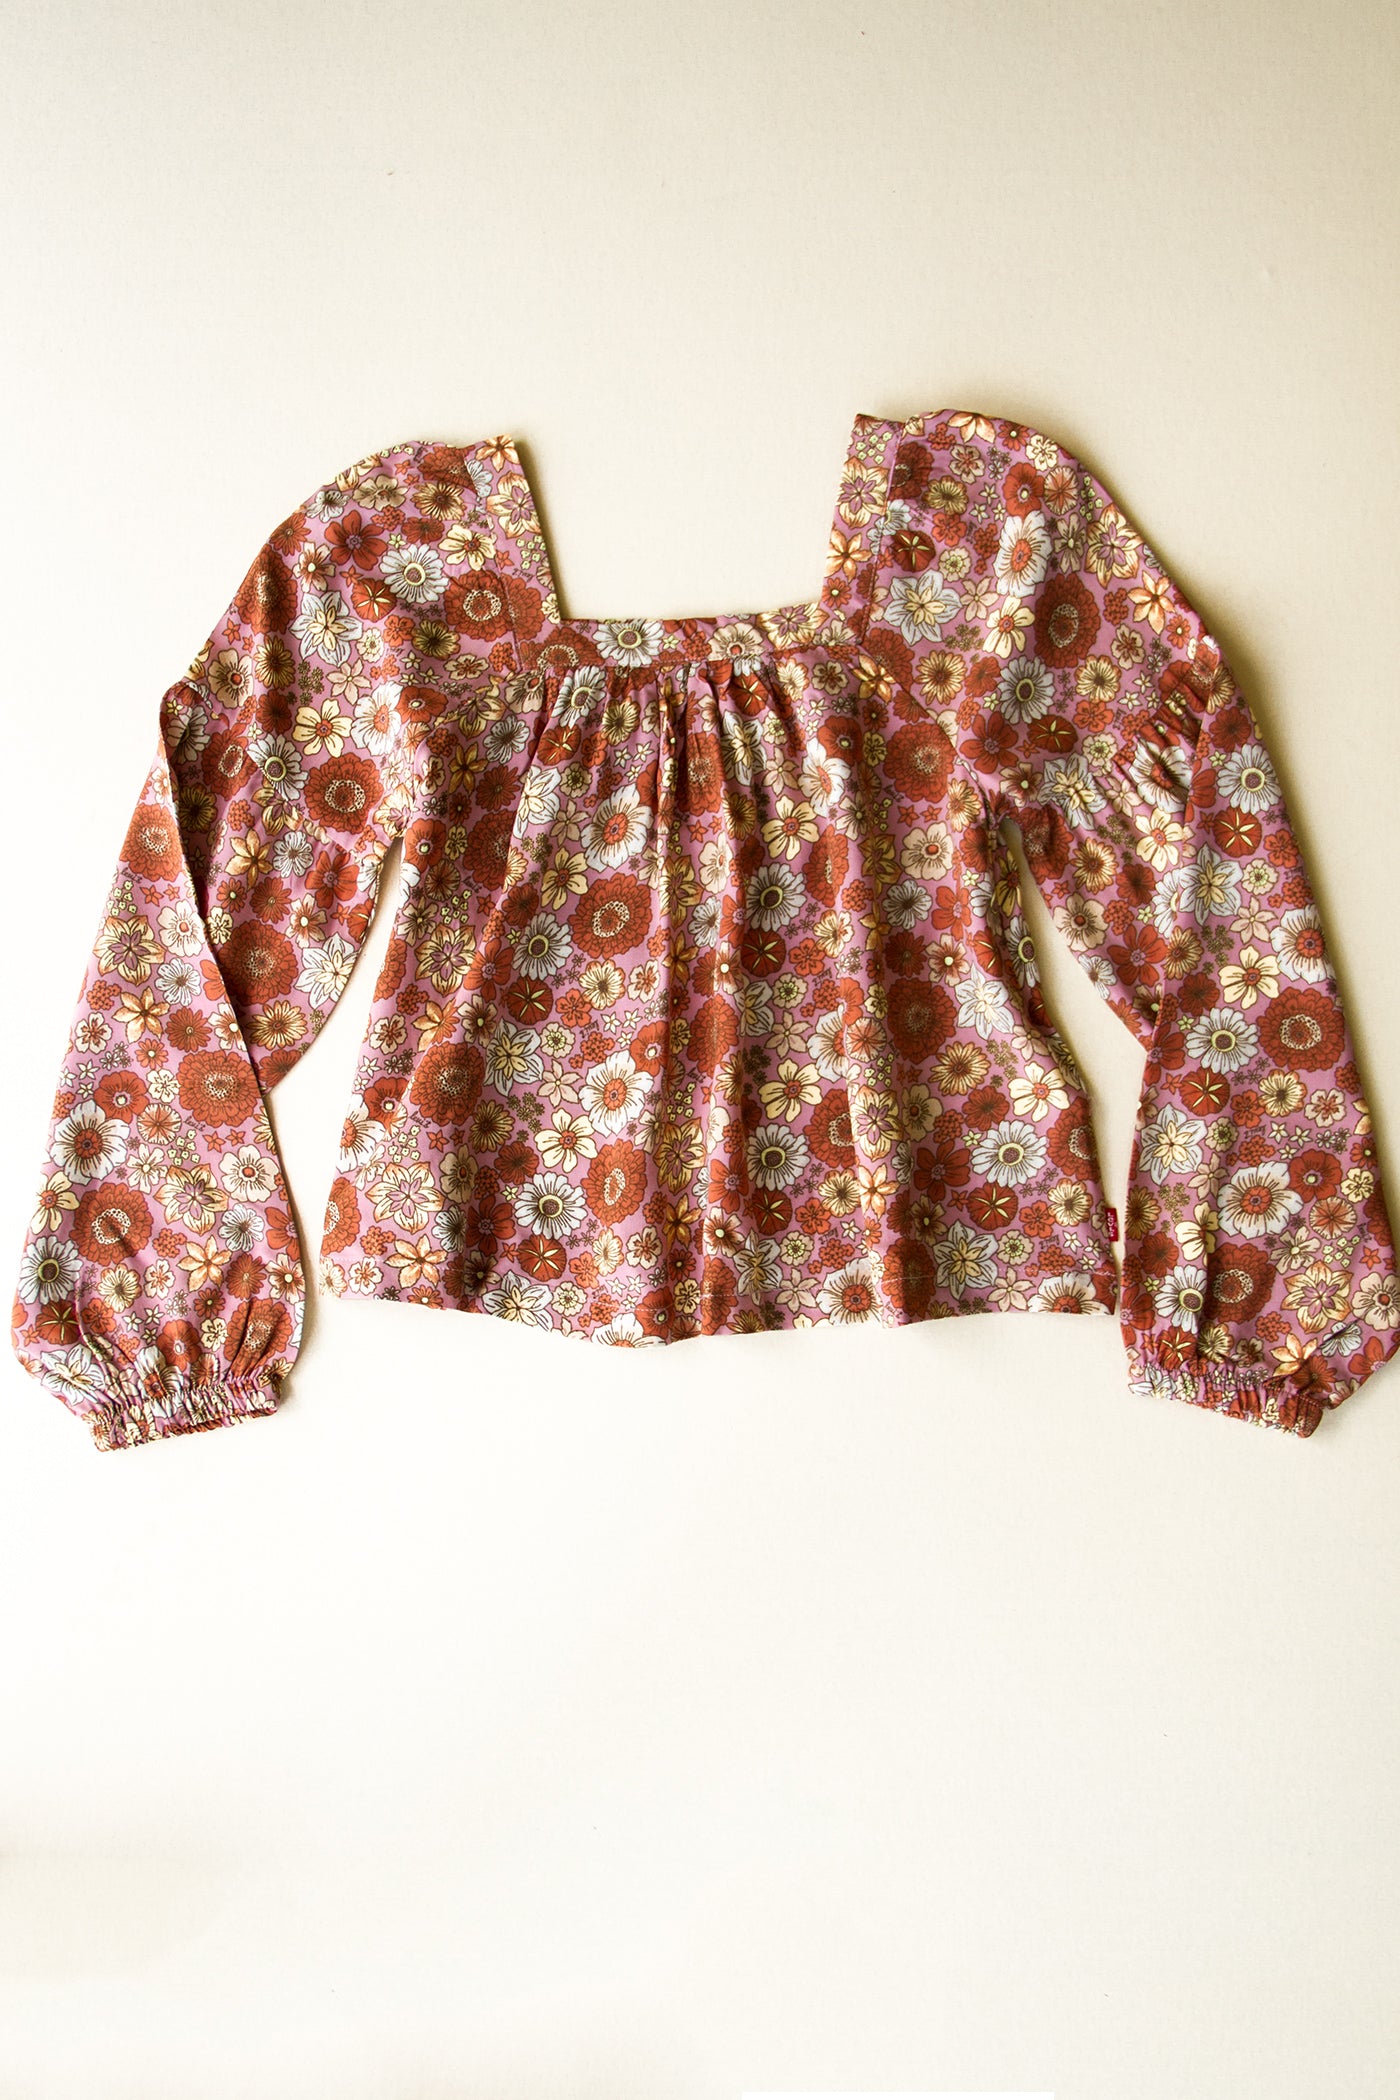 Long Sleeve Floral Kids Top by Levi's